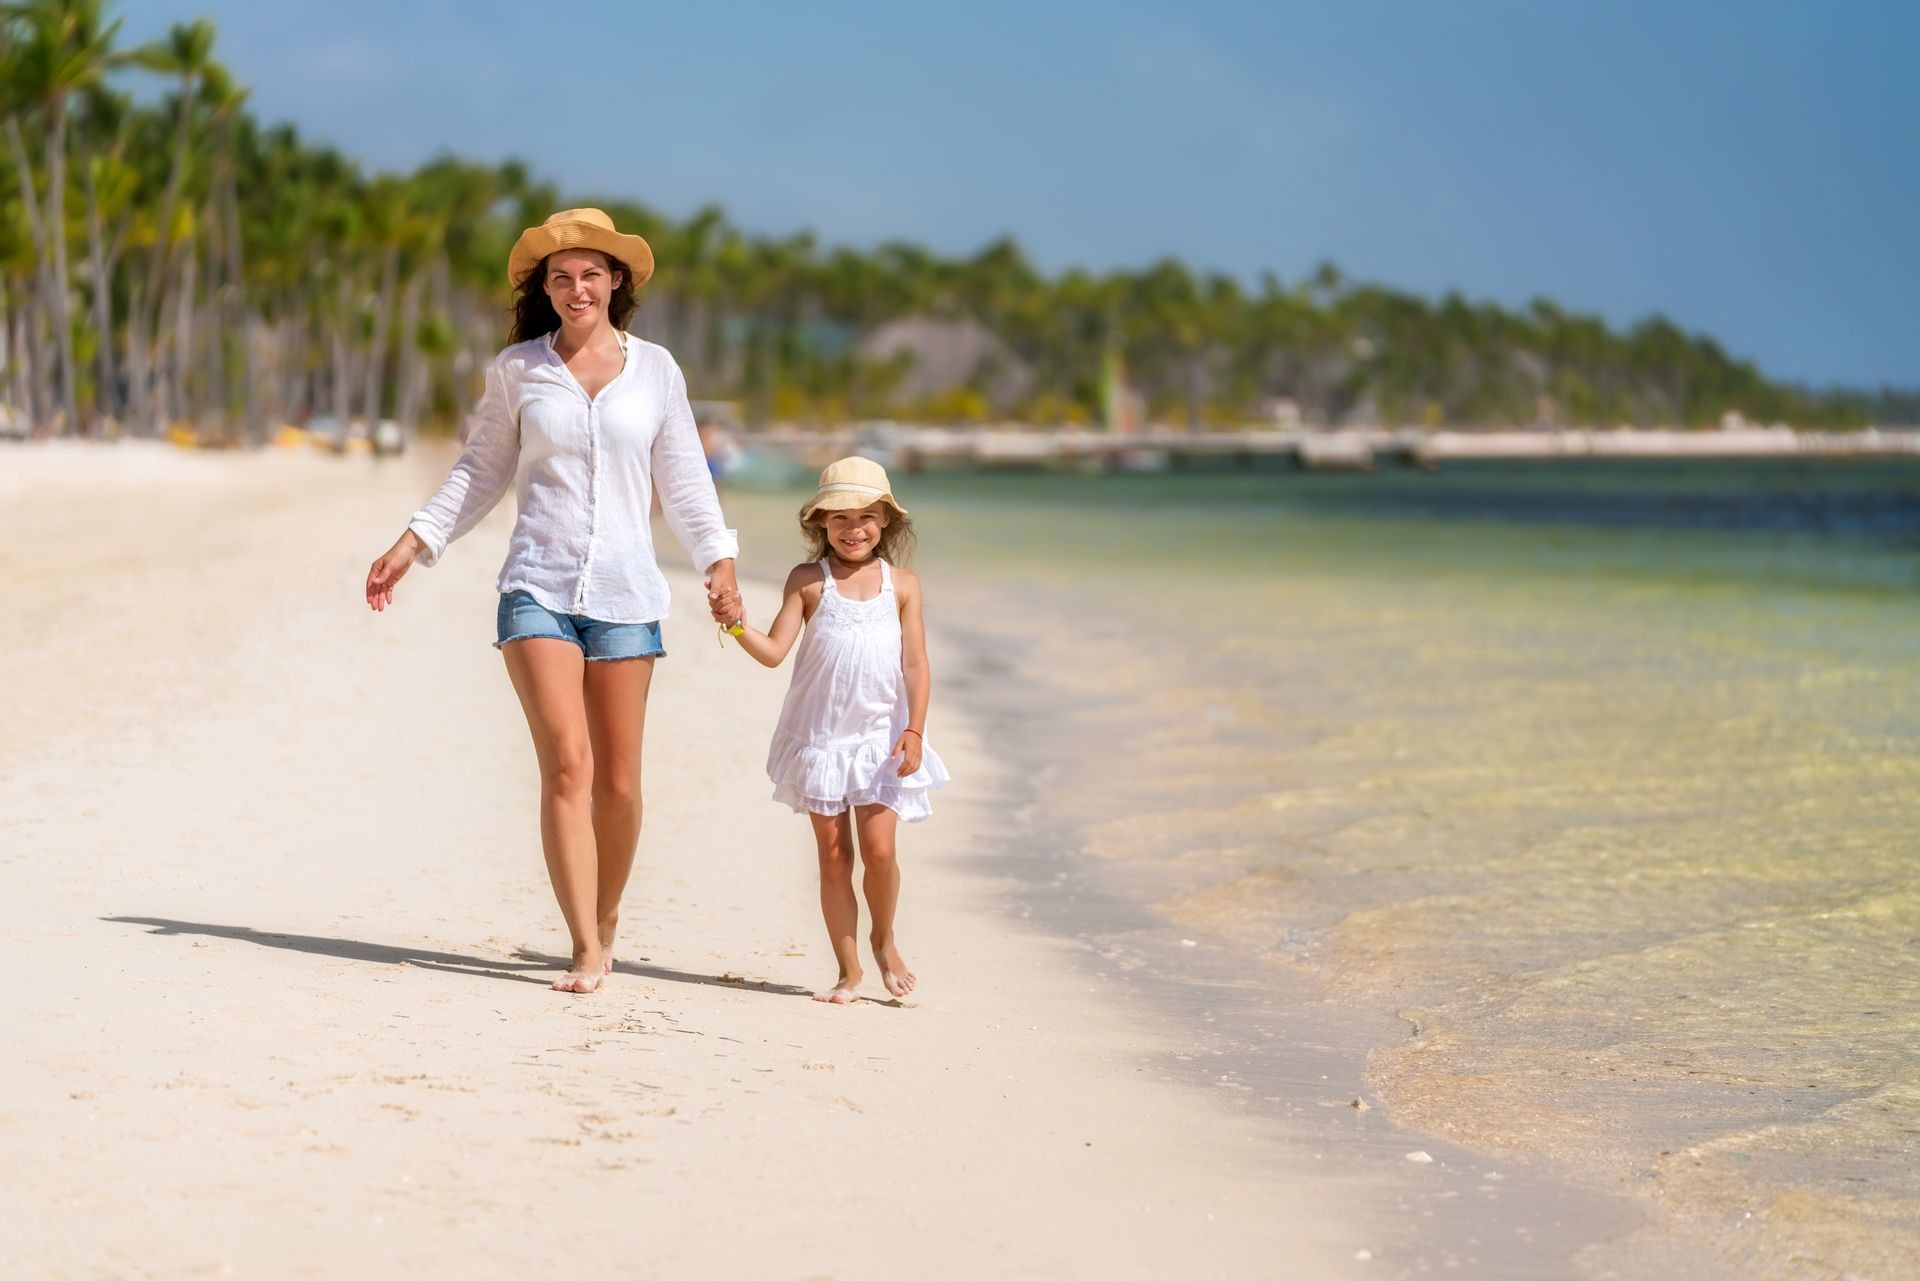 Young mother and little daughter walking on the beach in Dominican Republic